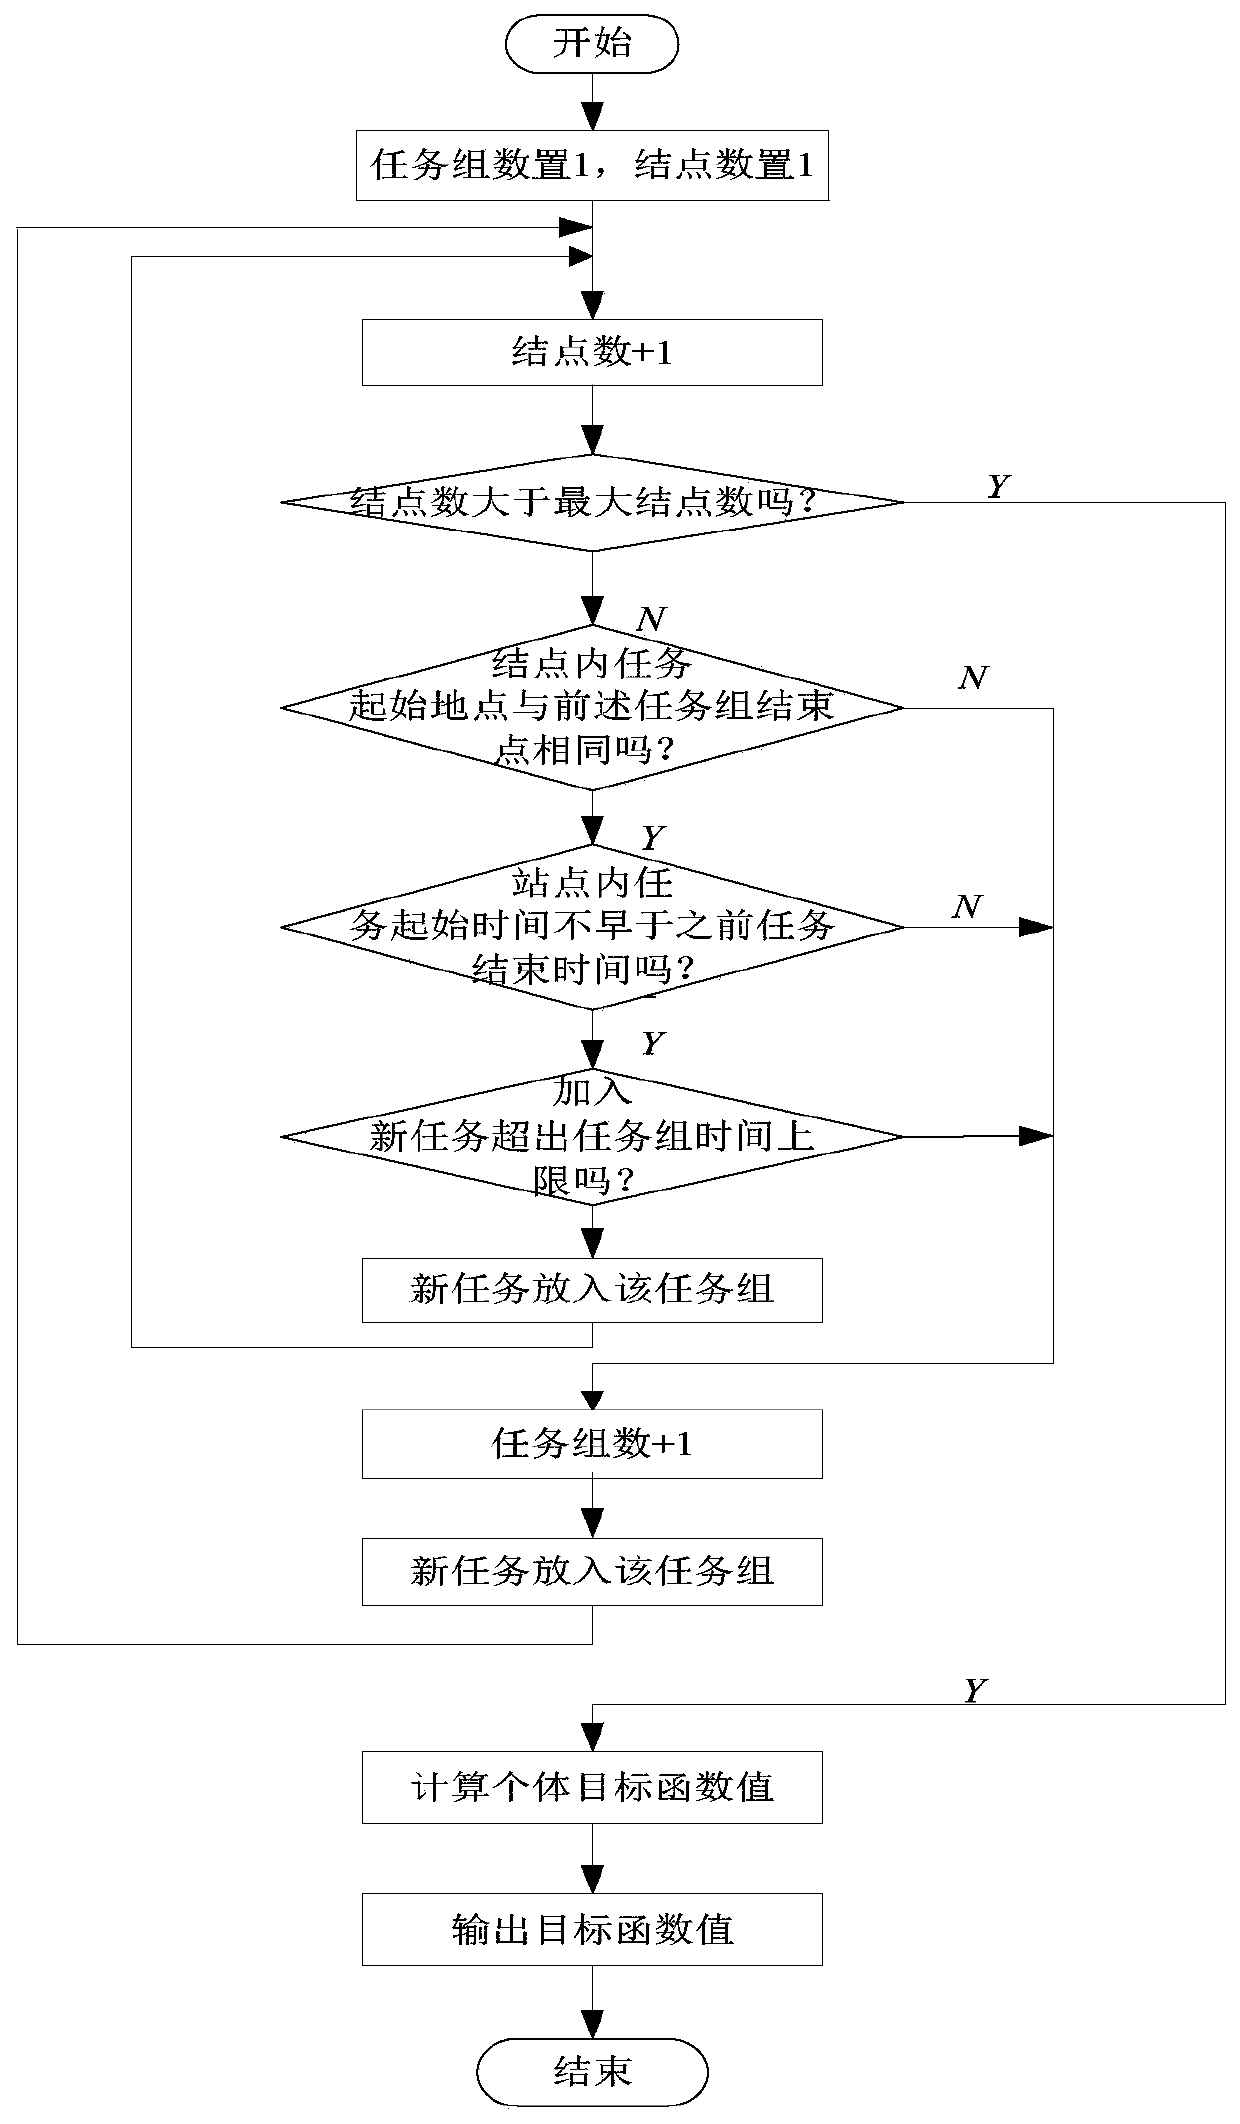 Ship piloting scheduling method and device based on pseudo traveling salesman problem